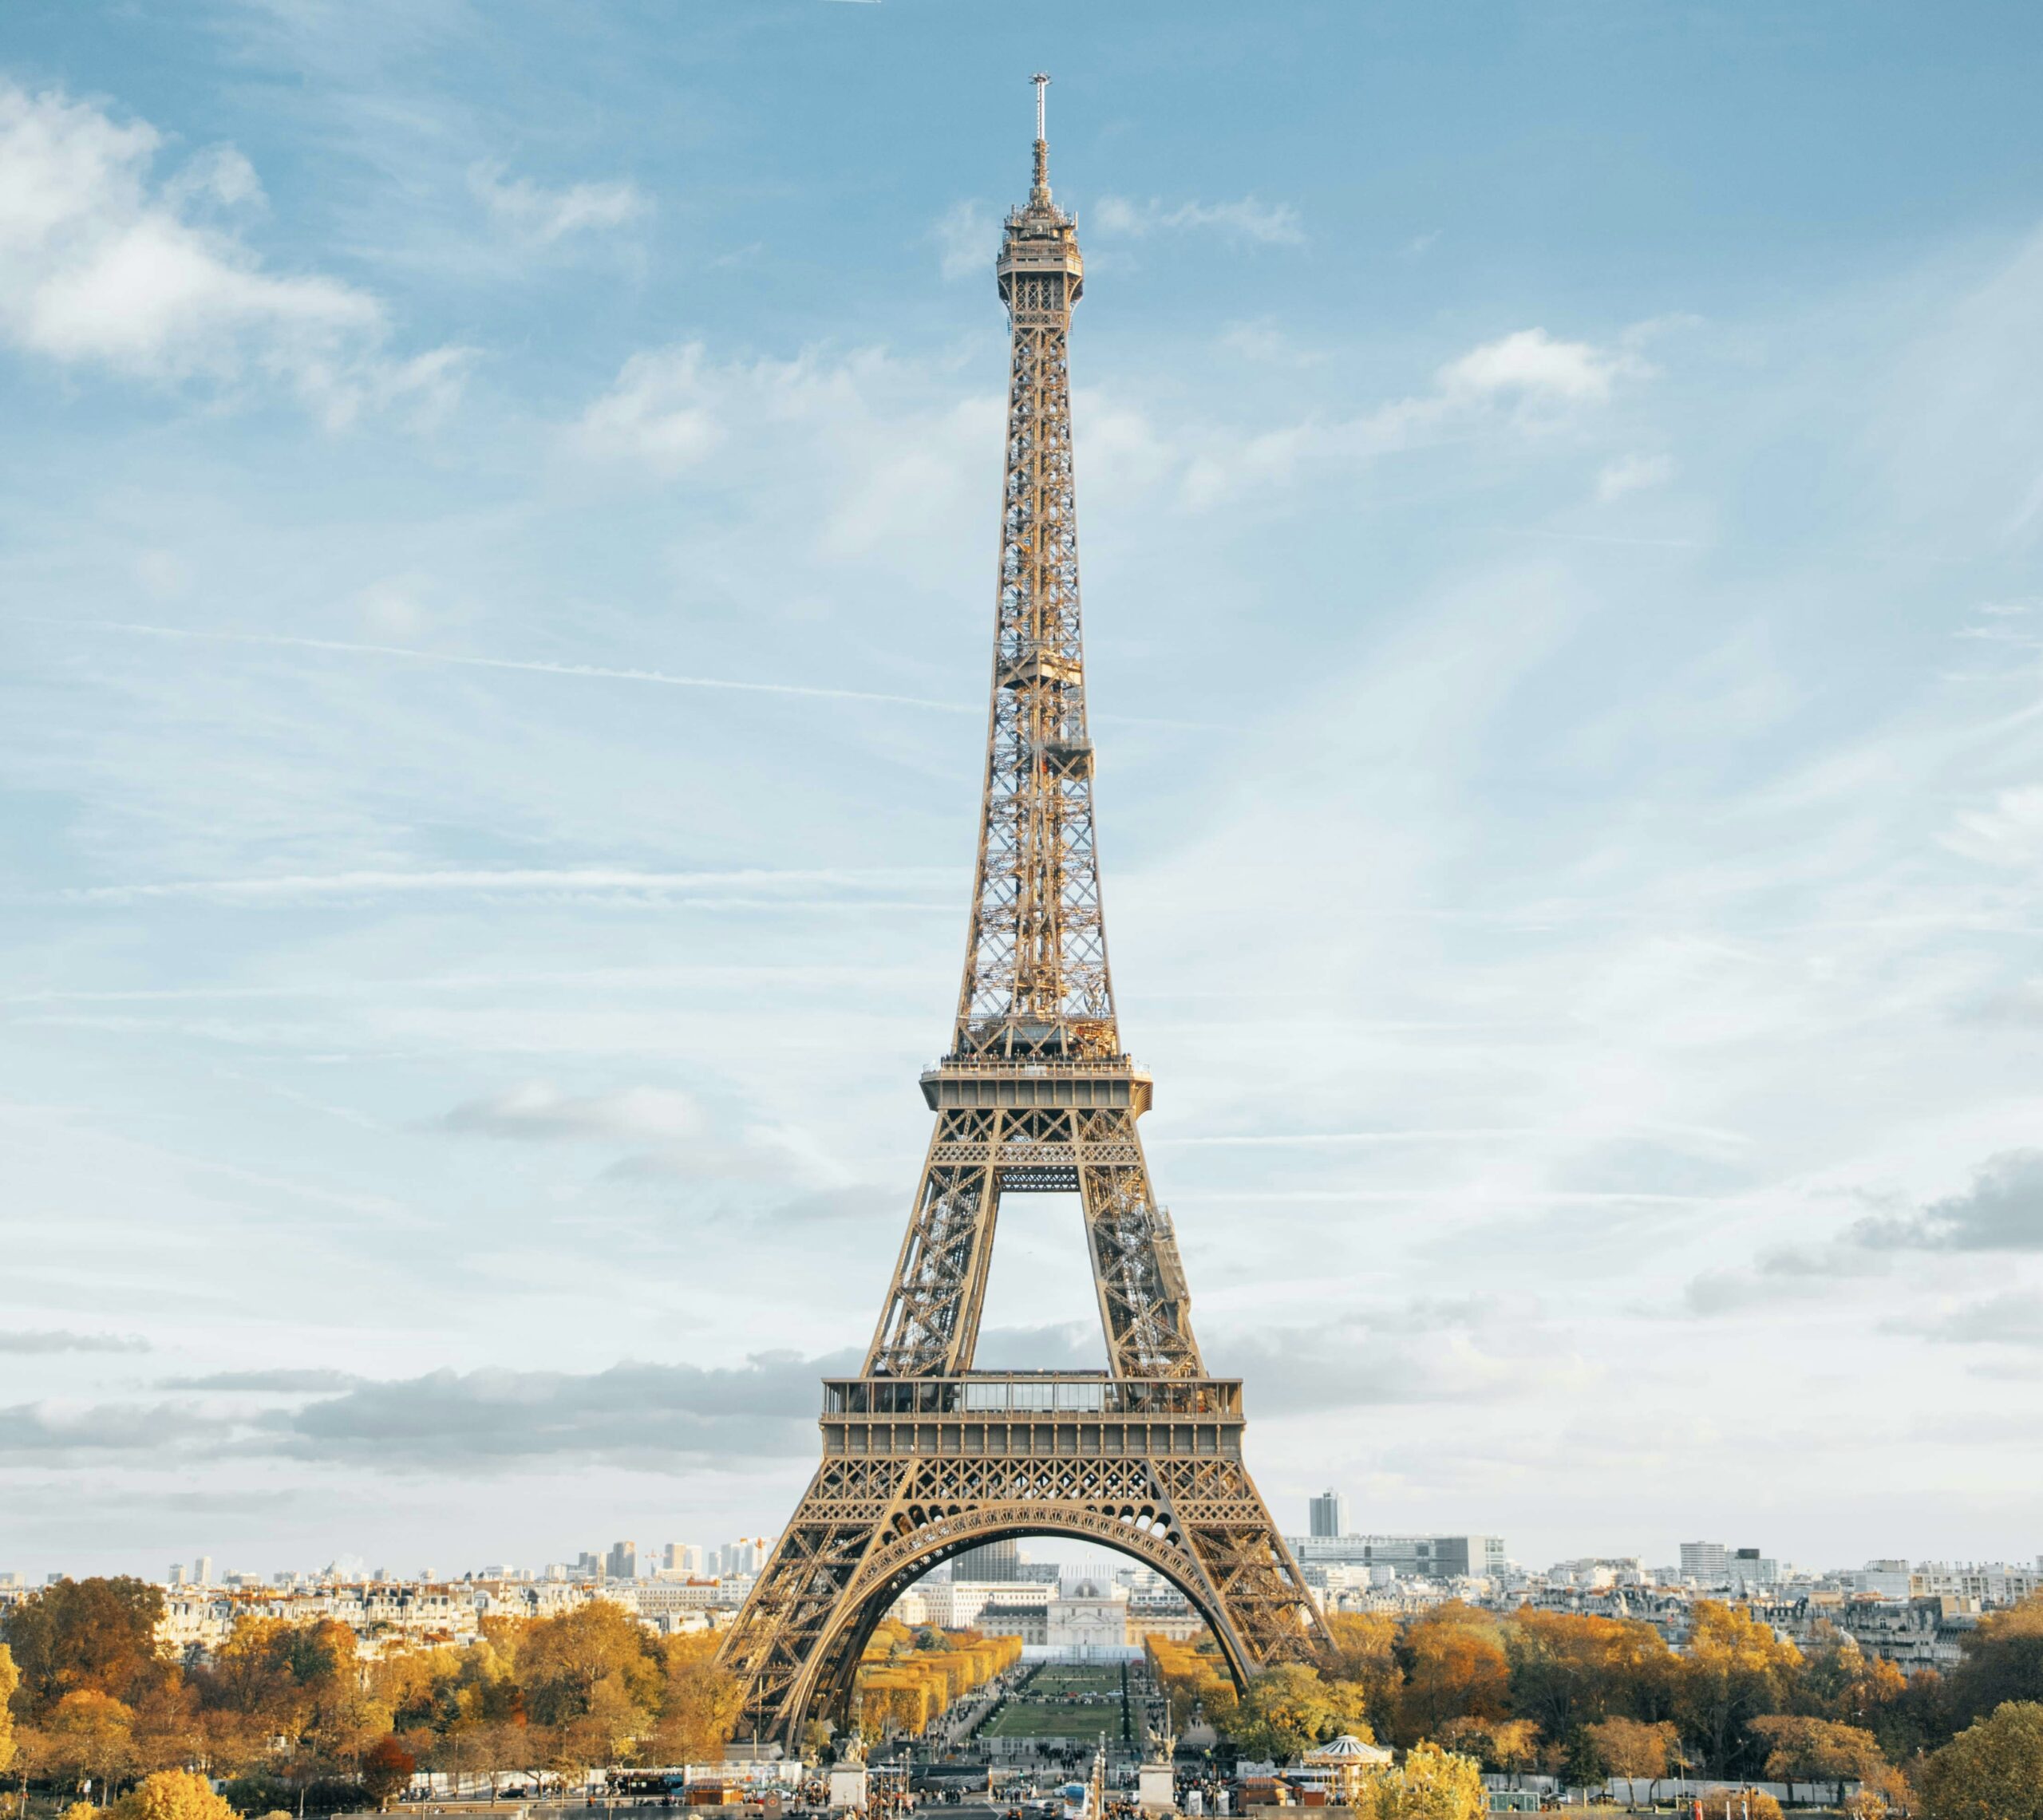 Paris, France is an iconic destination in Europe that travelers should be sure to visit.
Pictured: the Eiffel Tower on a bright blue day during the fall